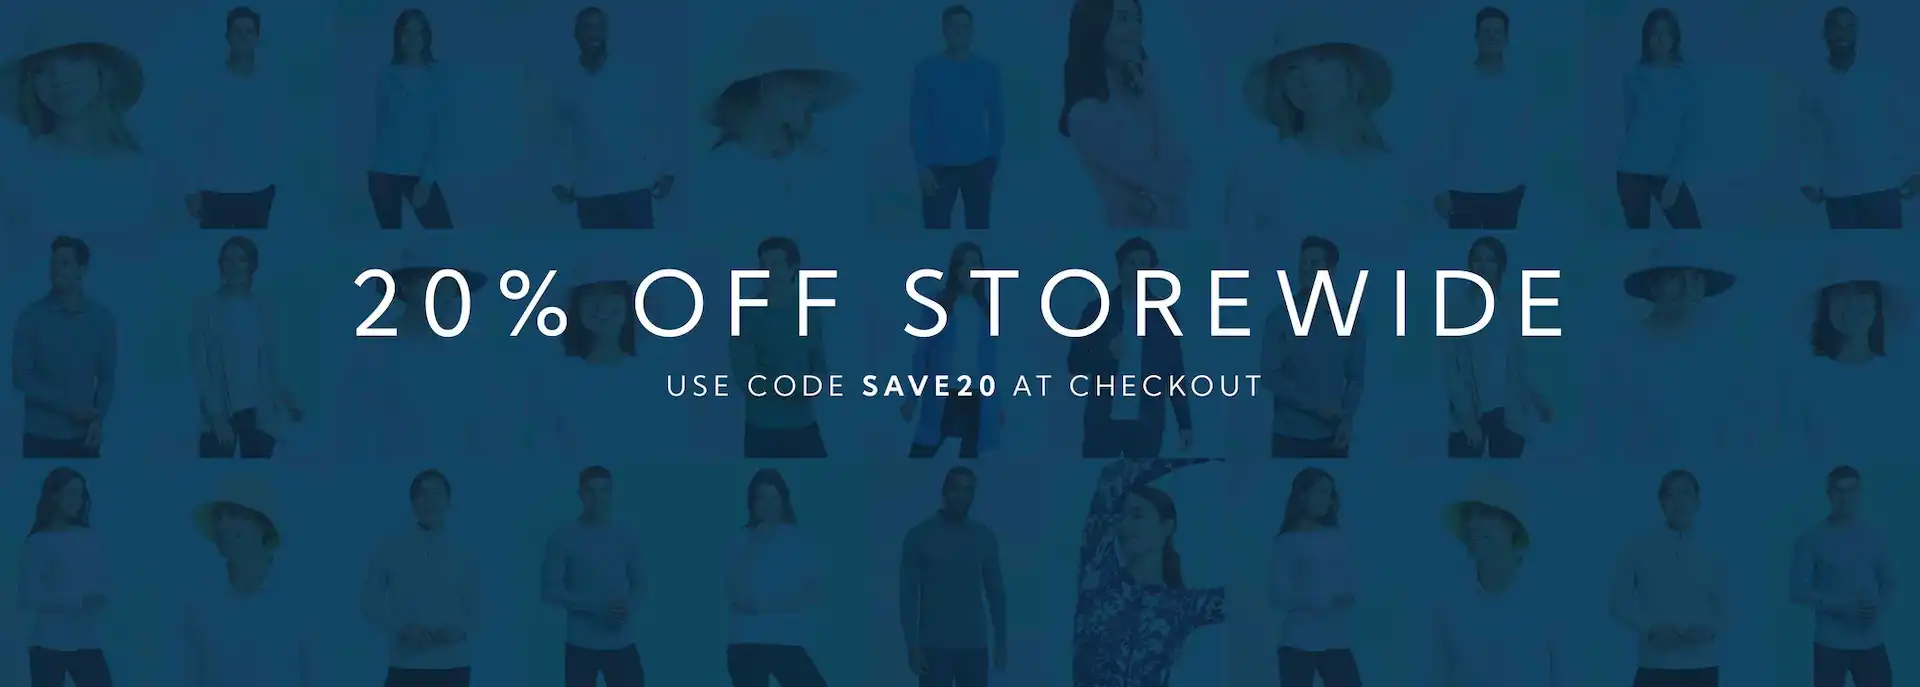 Solbari - Extra 20% OFF storewide with coupon